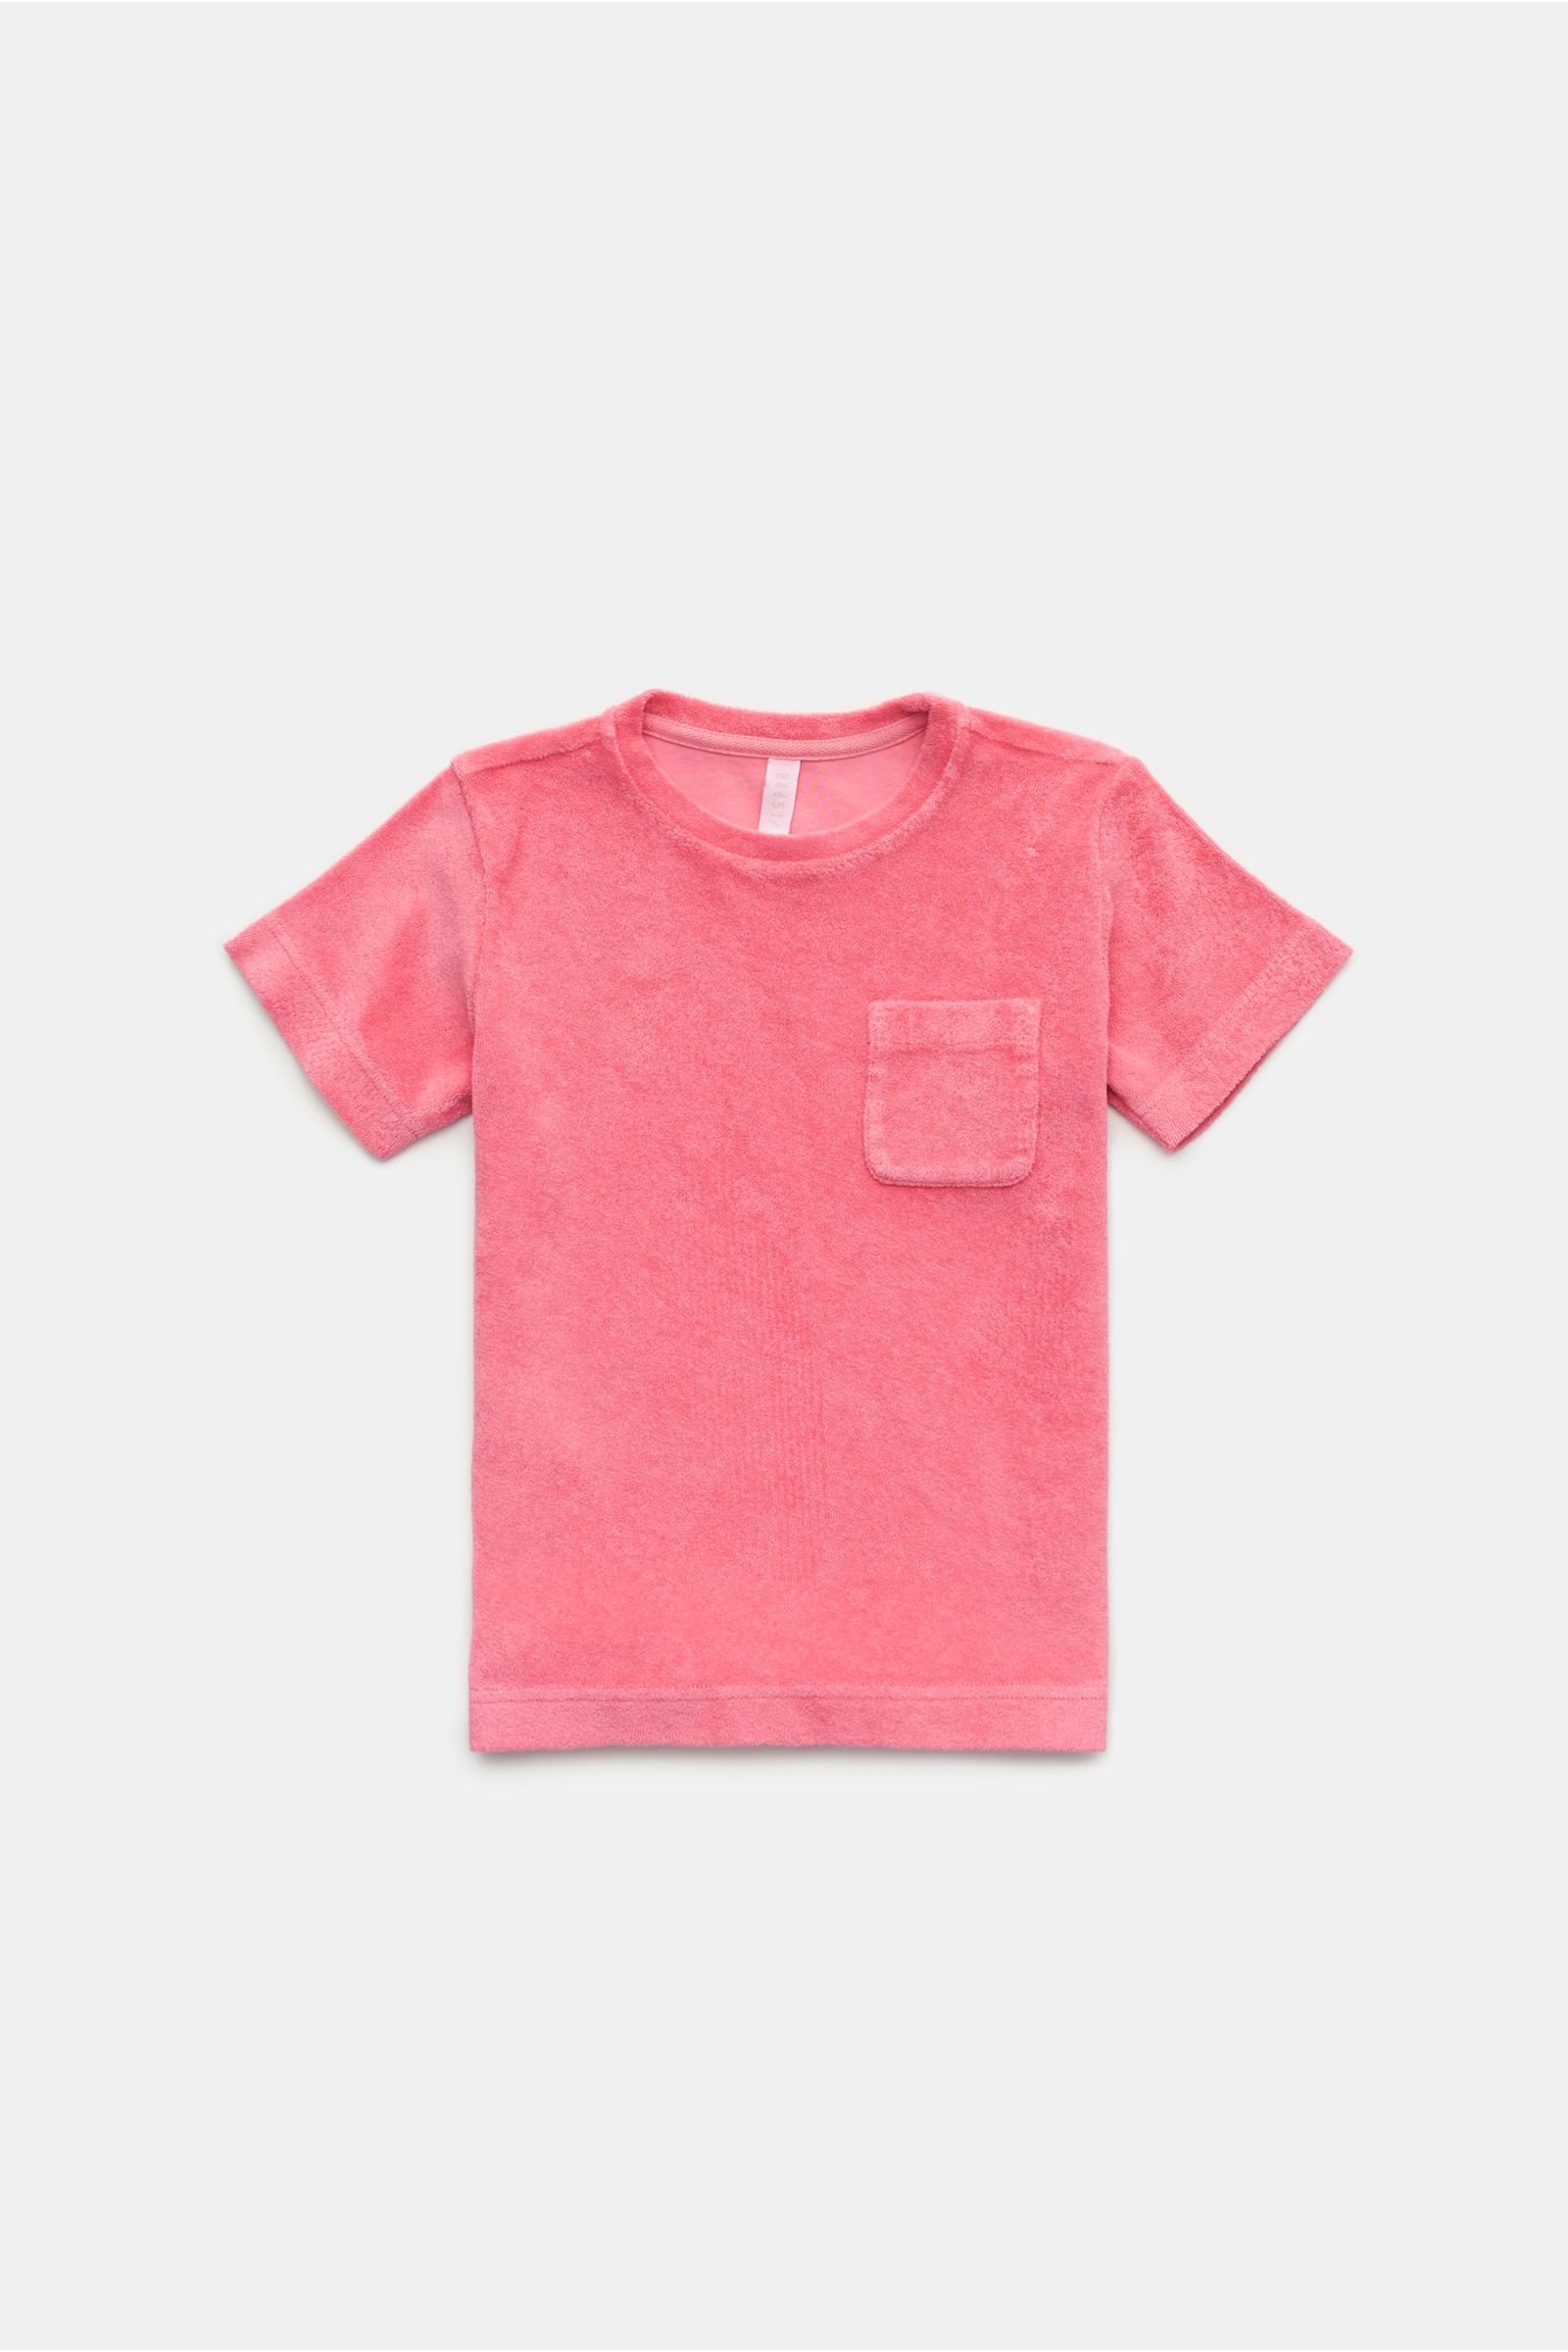 Kids terry crew neck T-shirt 'Kids Terry Tee' coral